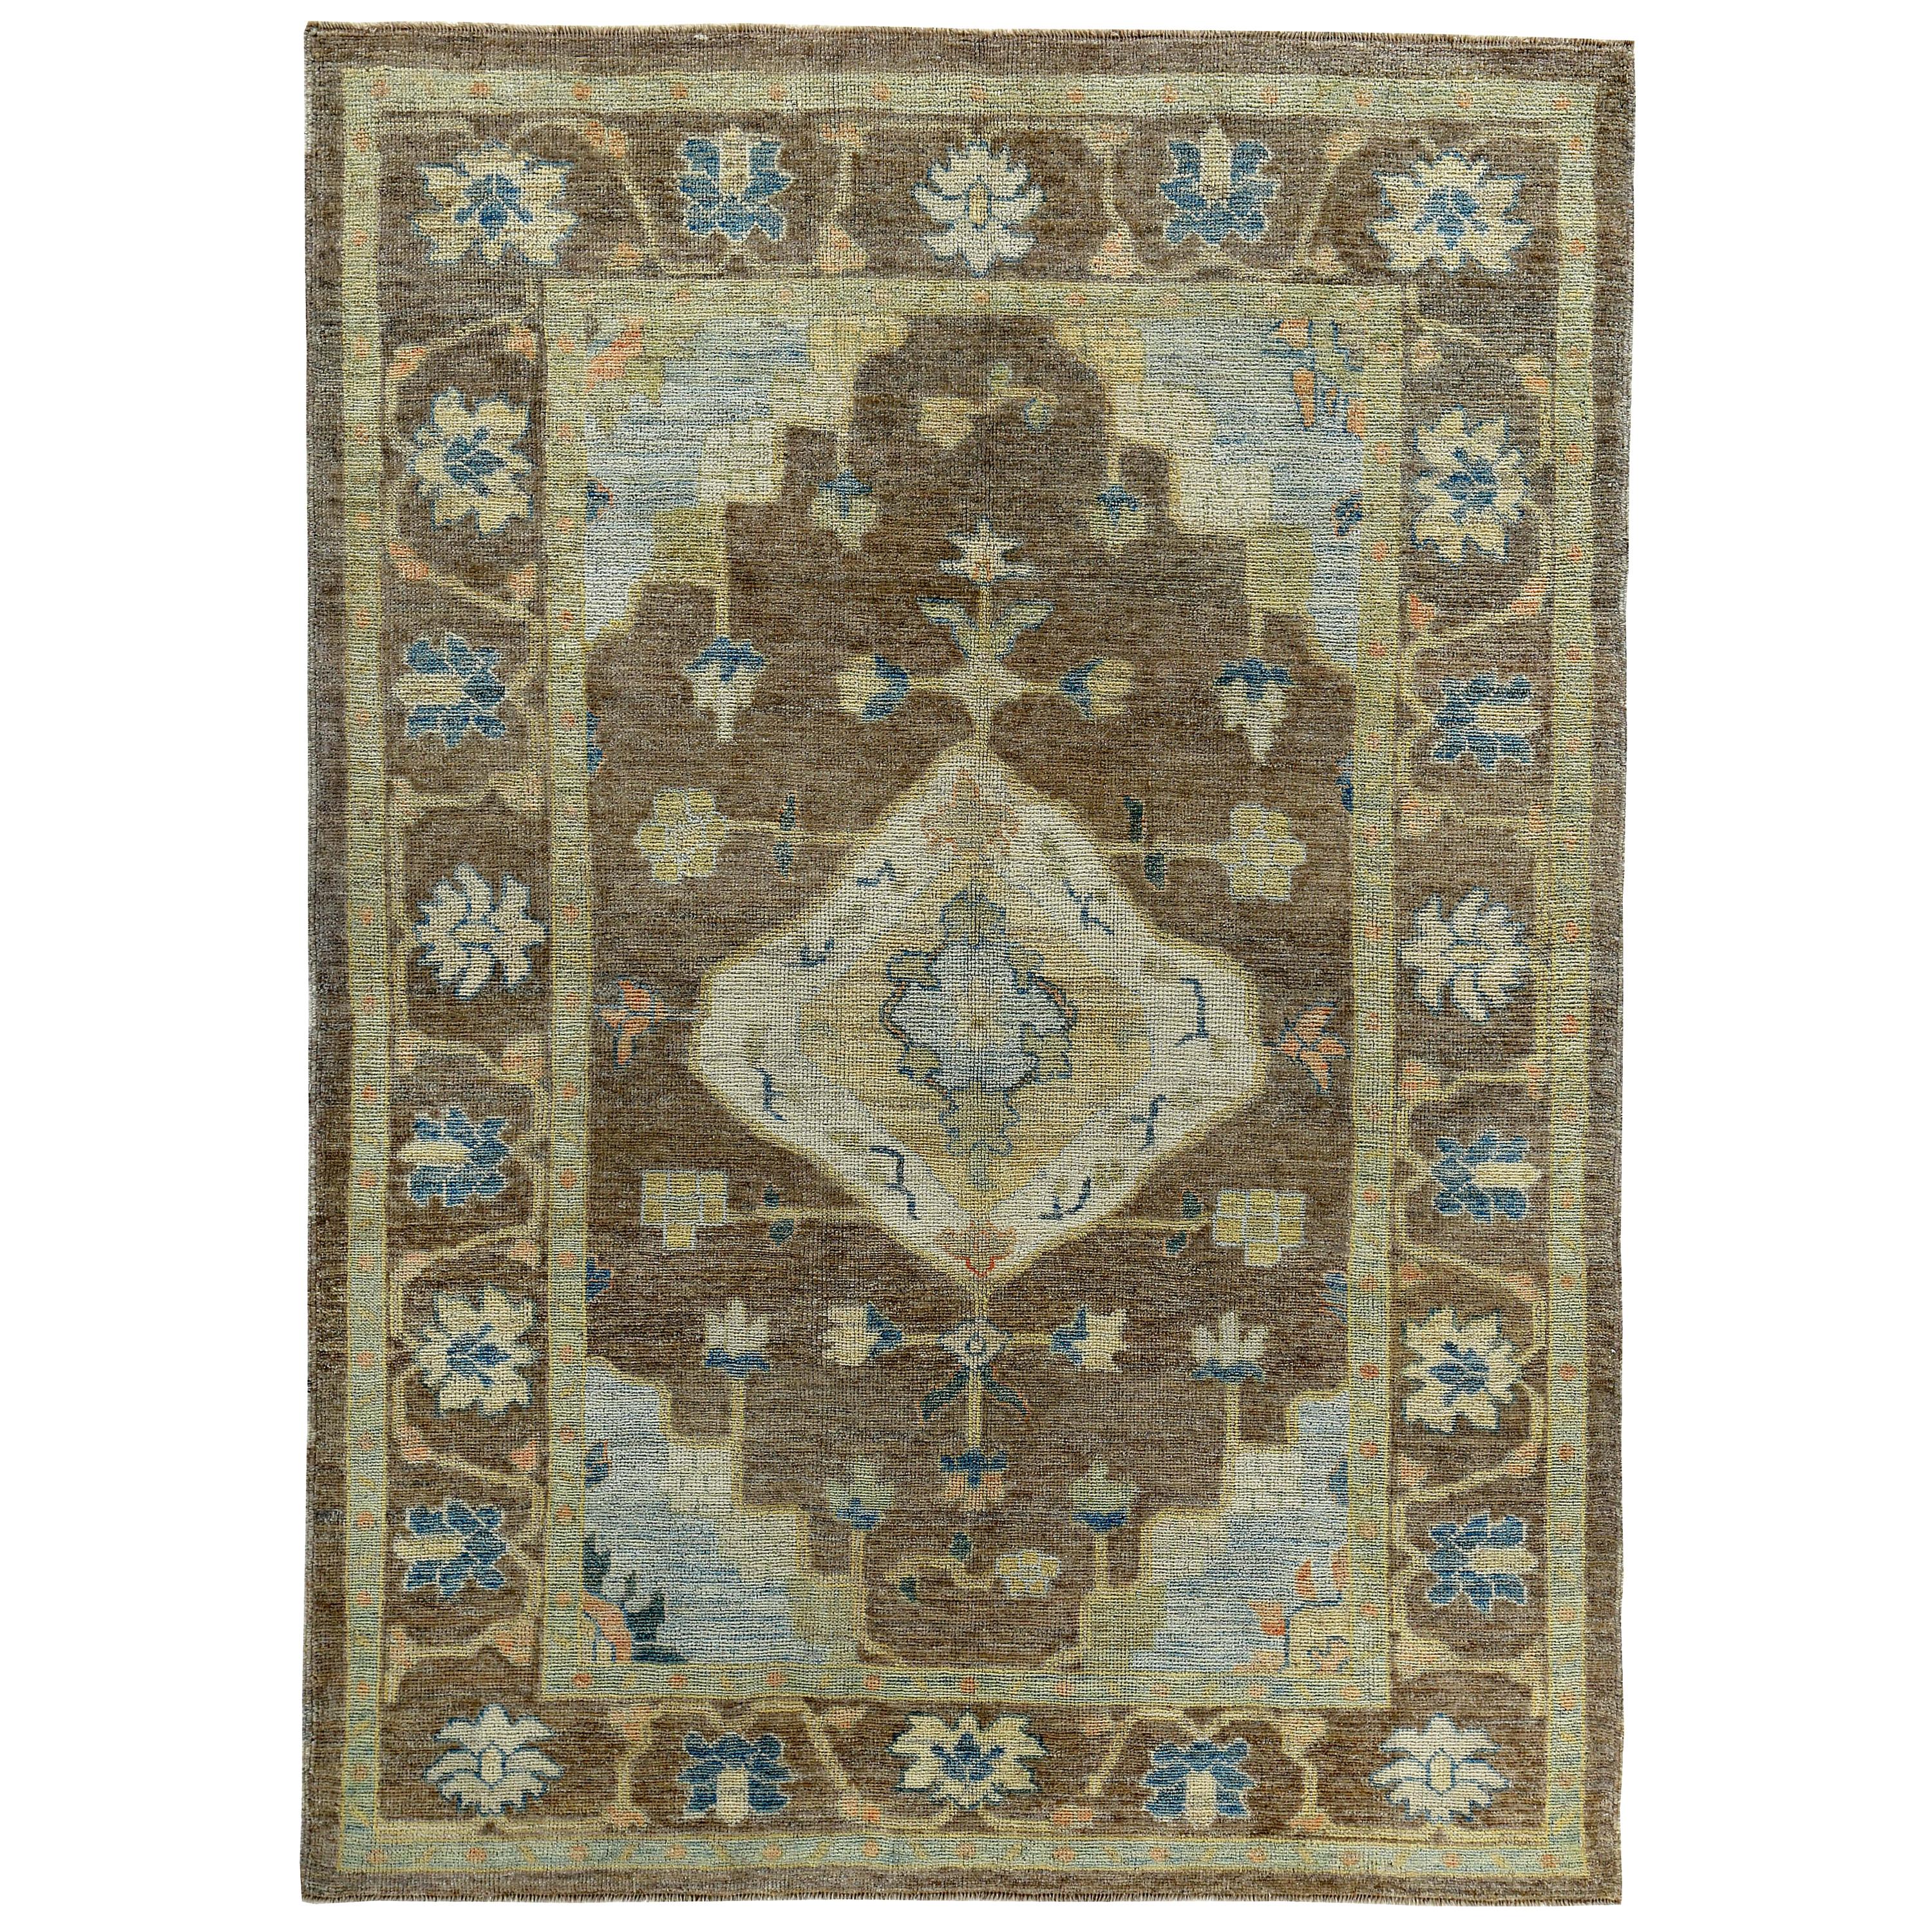 Turkish Oushak Rug with Navy and Ivory Flower Heads on Brown Field